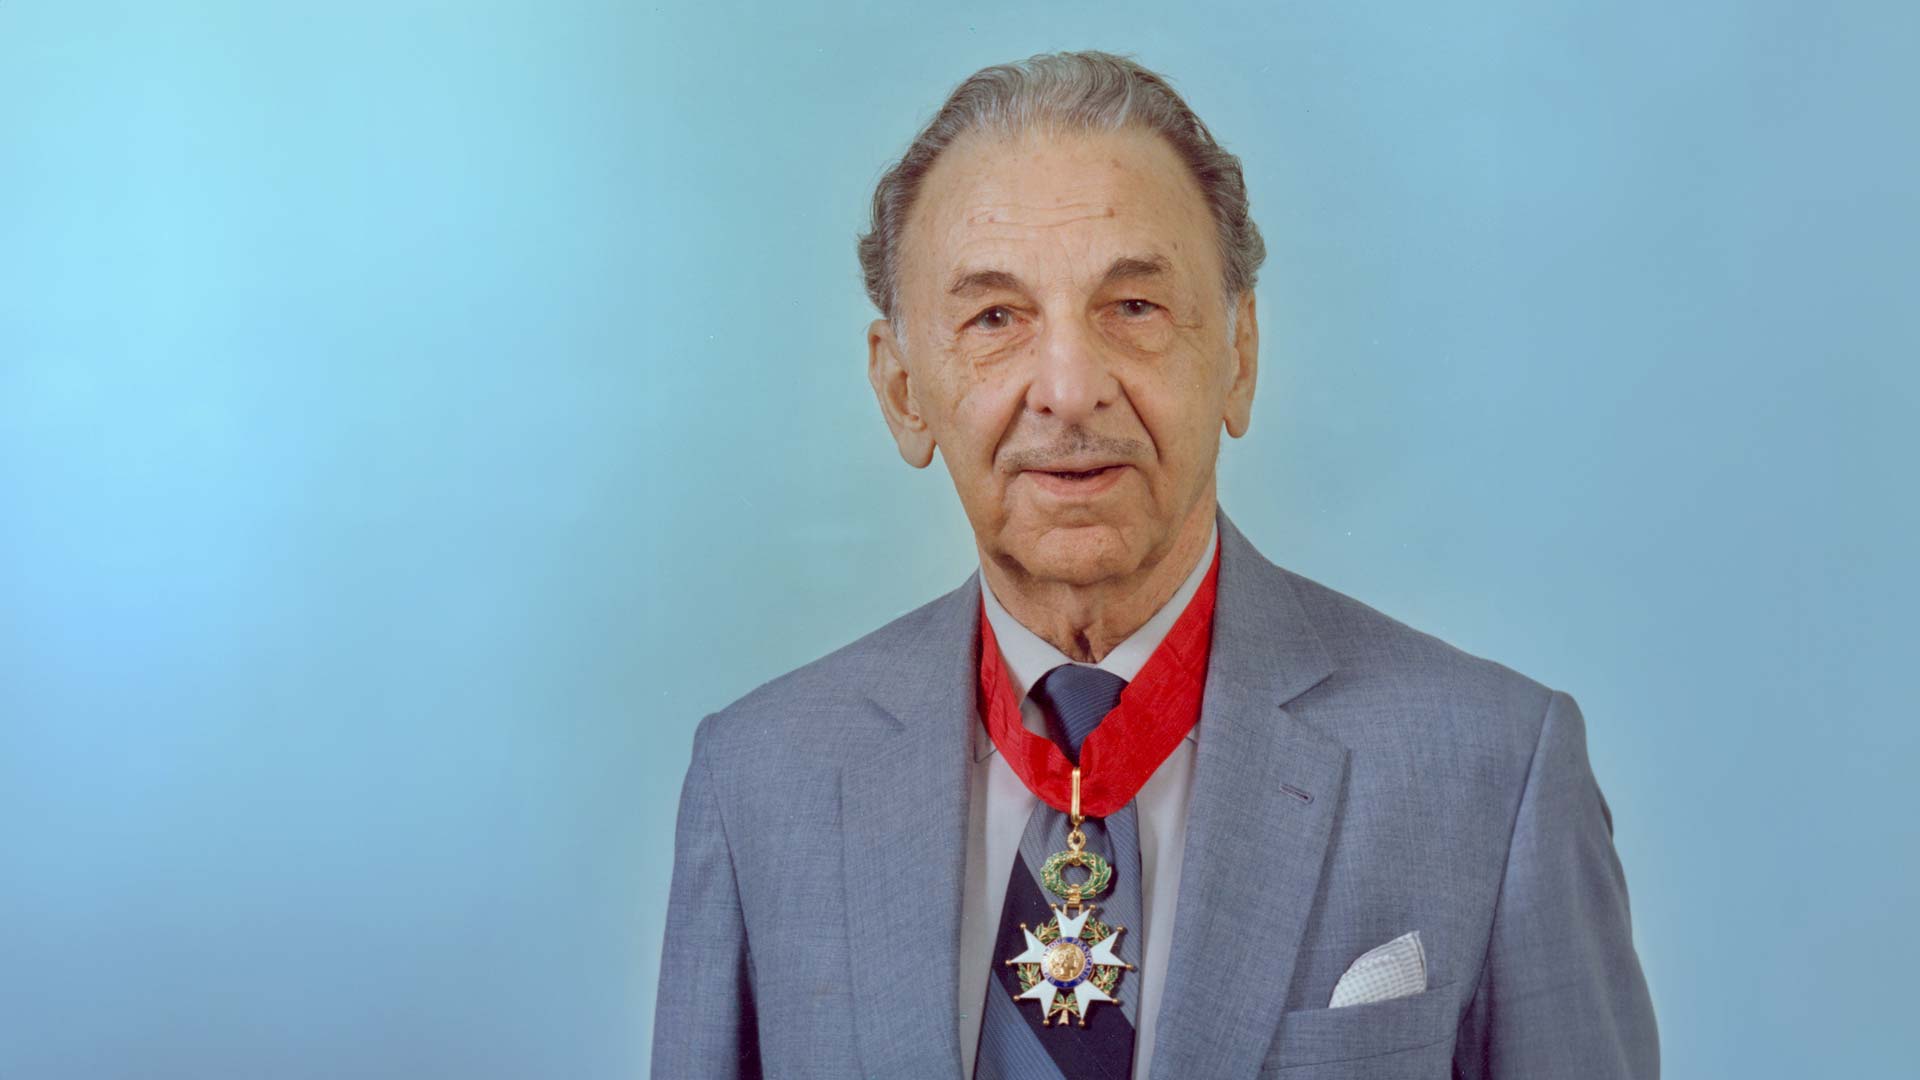 JRD Tata with the medal